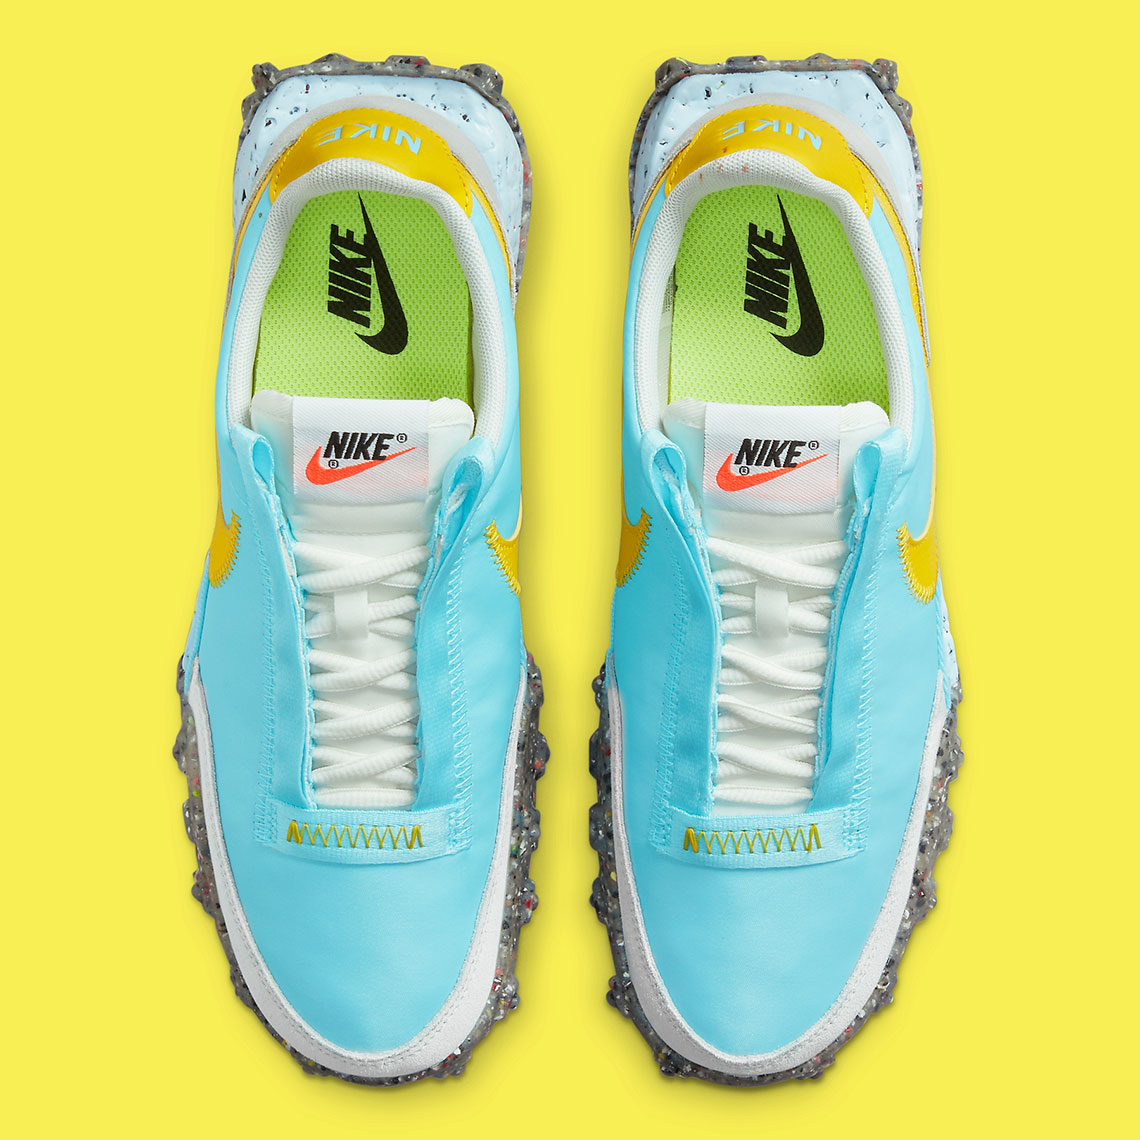 Nike Waffle Racer Crater Wmns Bleached Aqua Sail Photon Dust Speed Yellow Ct1983 400 1